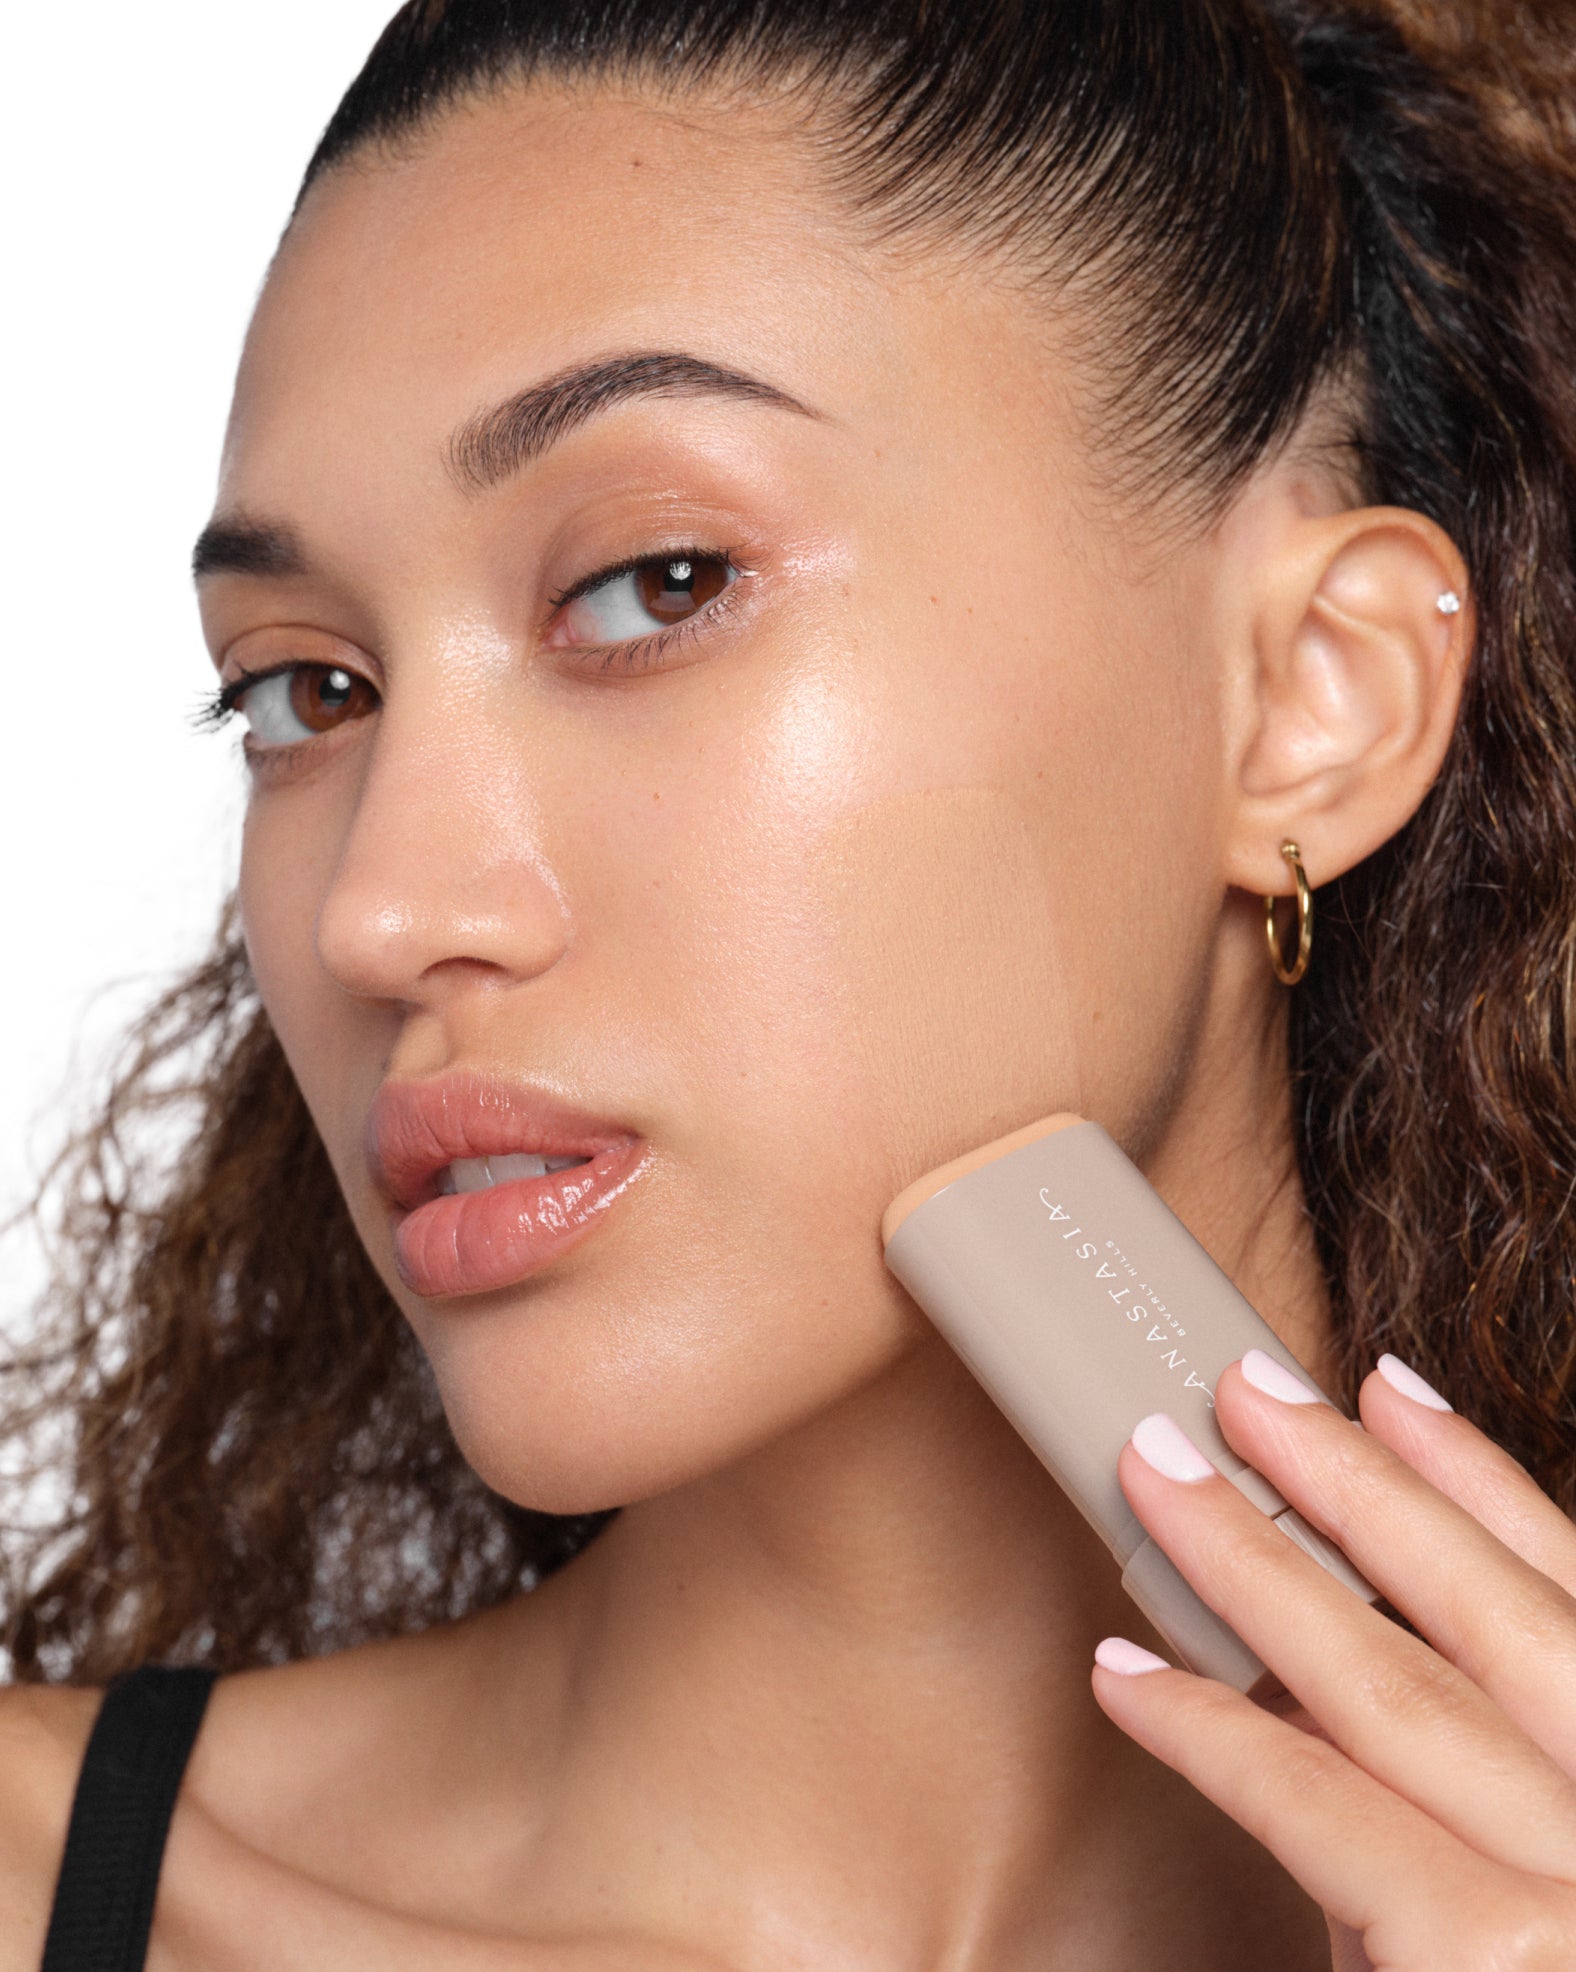 How to Use: Beauty Balm in Shade 10